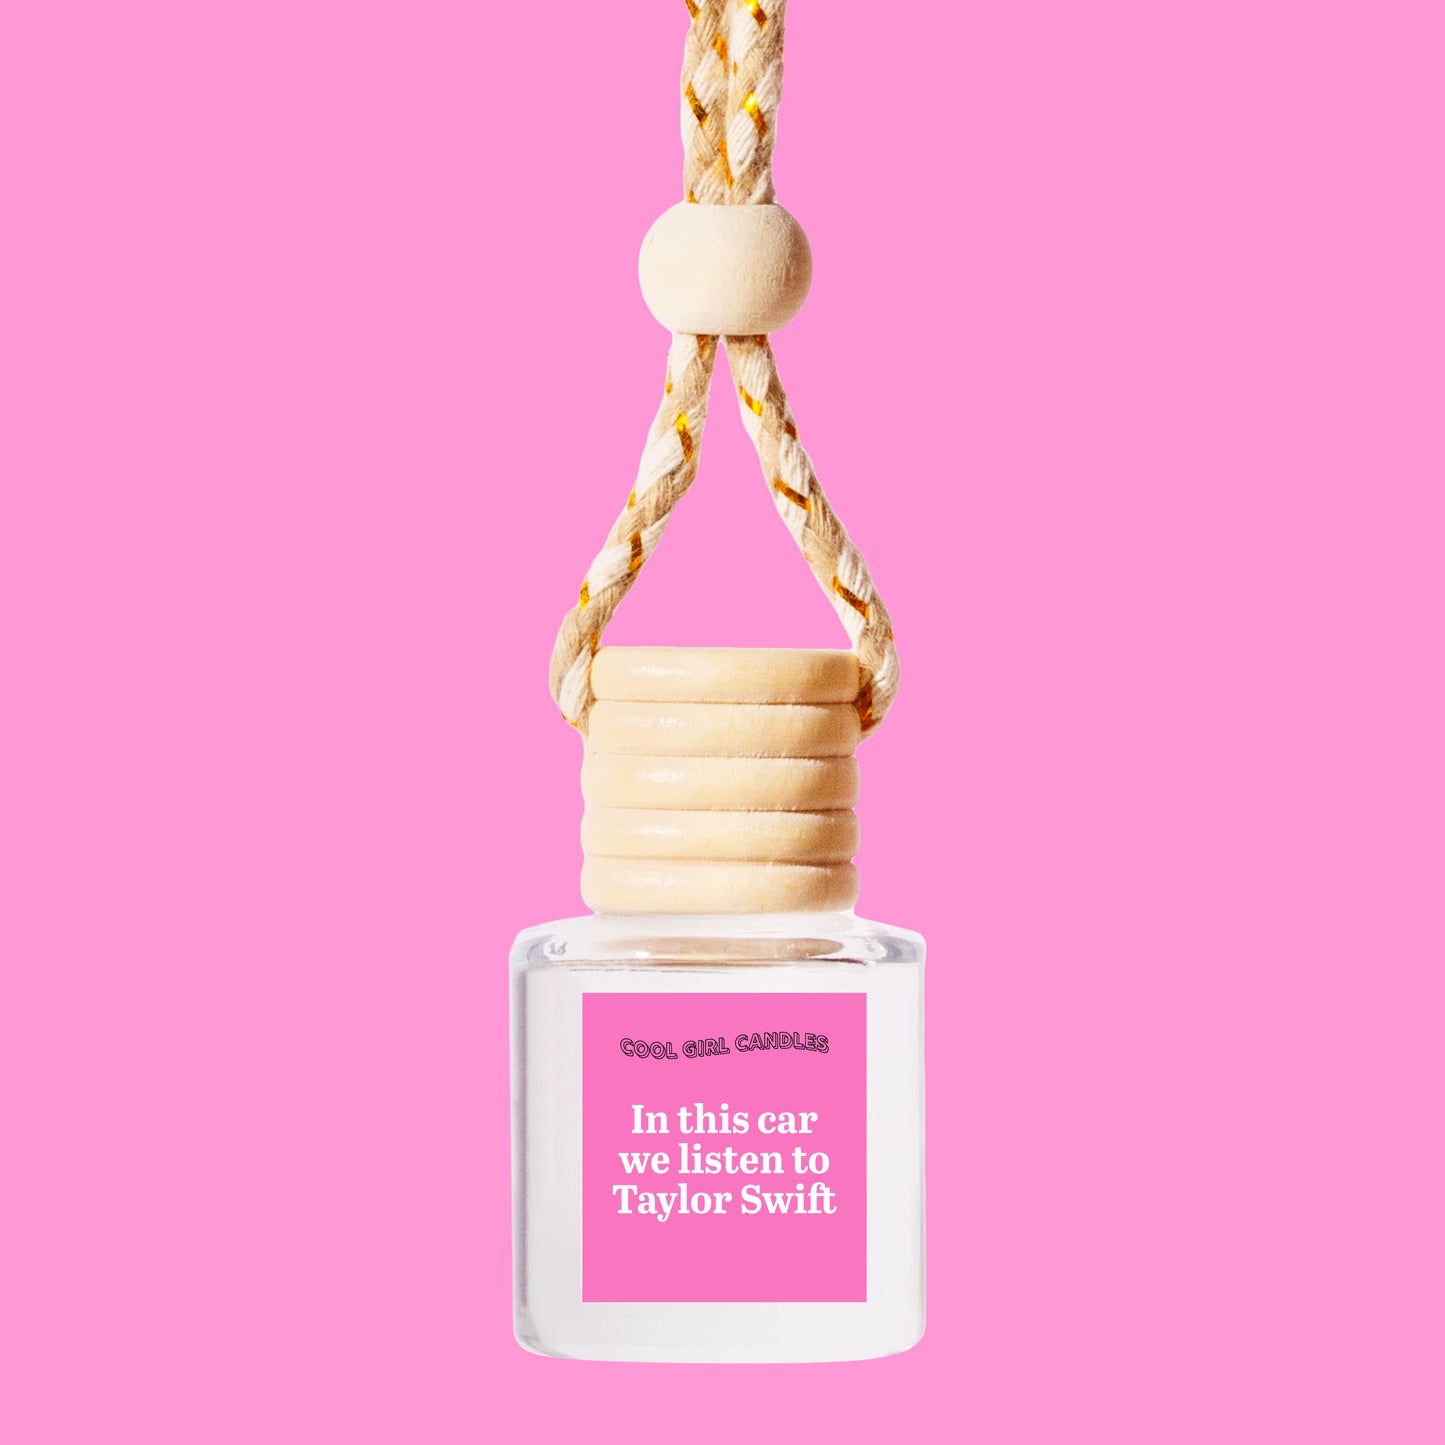 We Listen To Taylor Swift Scented Car Freshener Diffuser Gift for Taylor swiftie fans